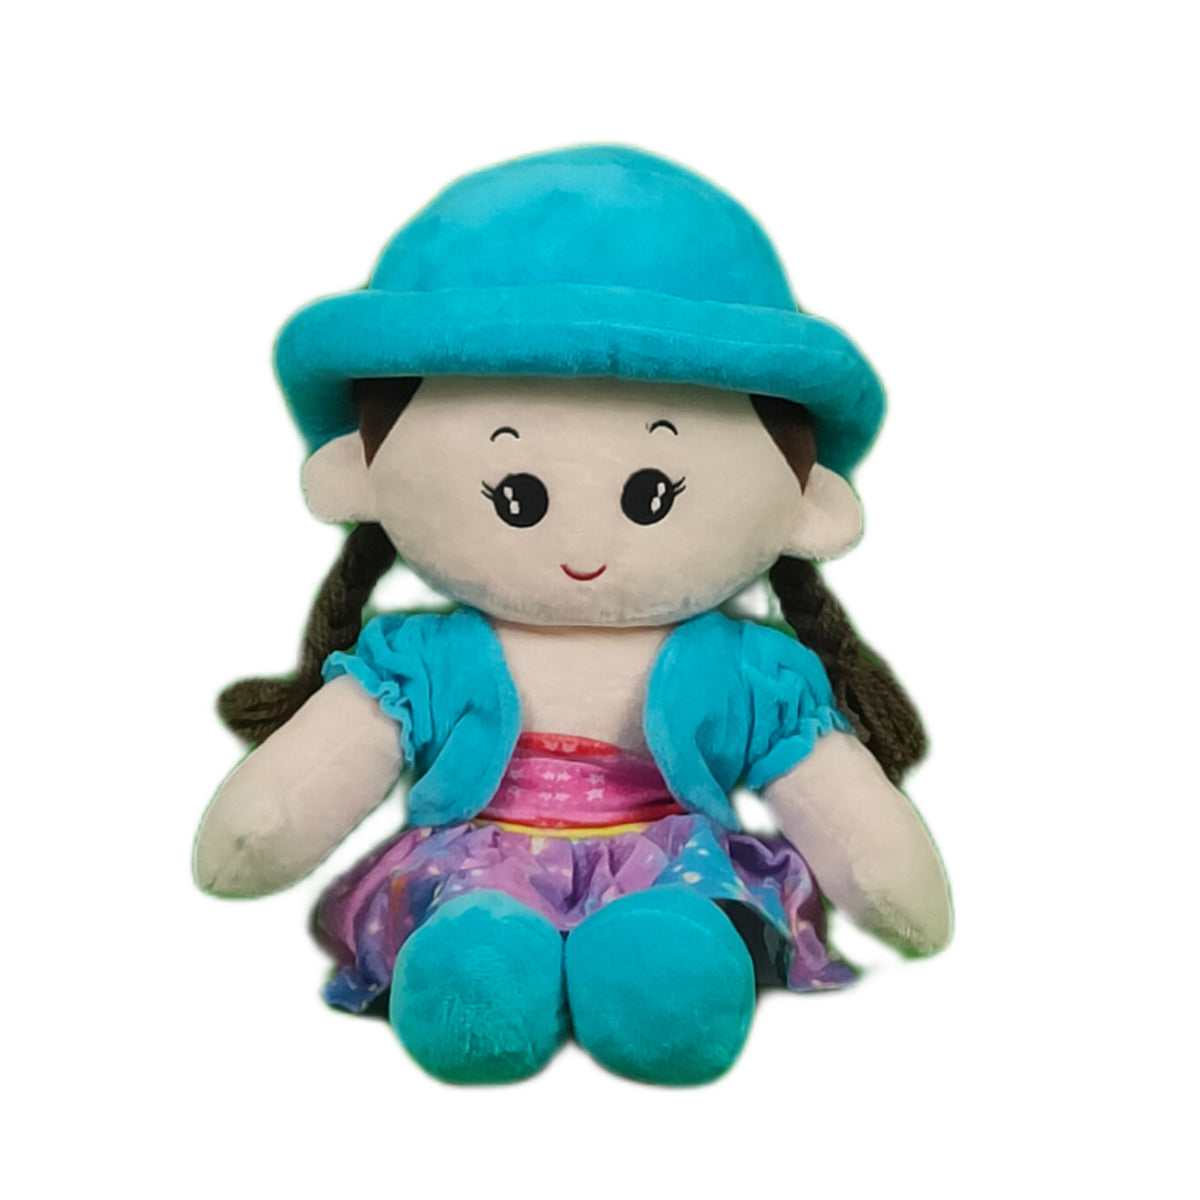 Play Hour Rag Doll Plush Soft Toy Wearing Sky Cap for Ages 3 Years and Up, 45cm